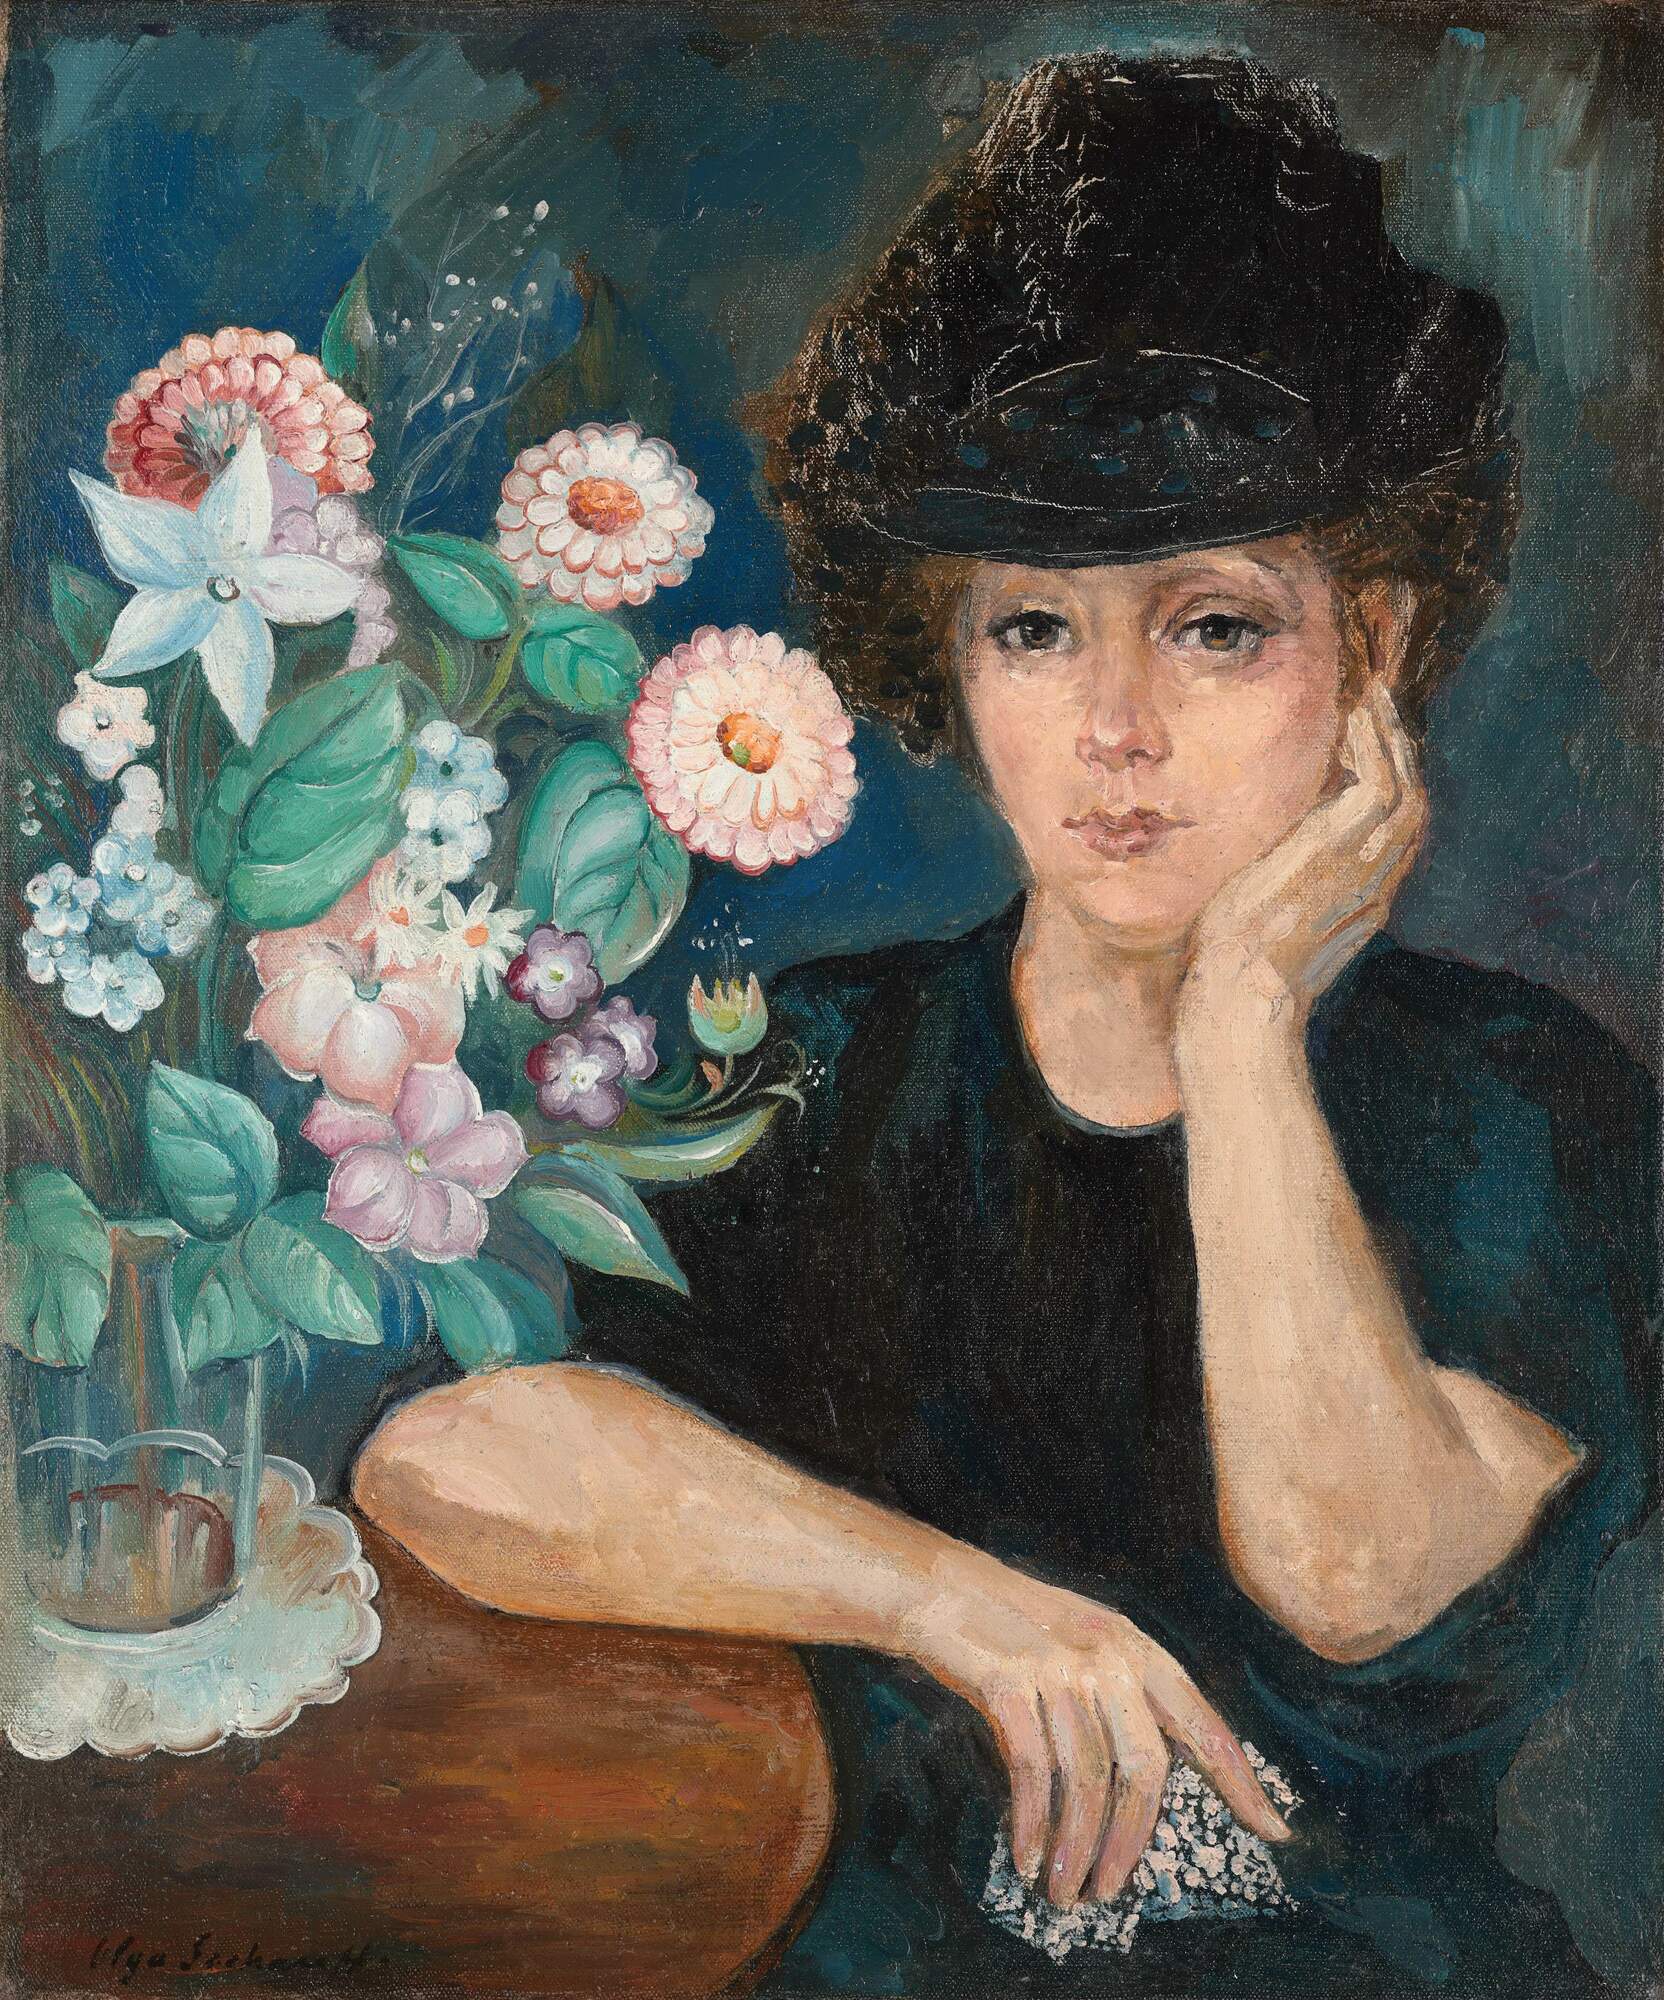 Self-Portrait with Flowers